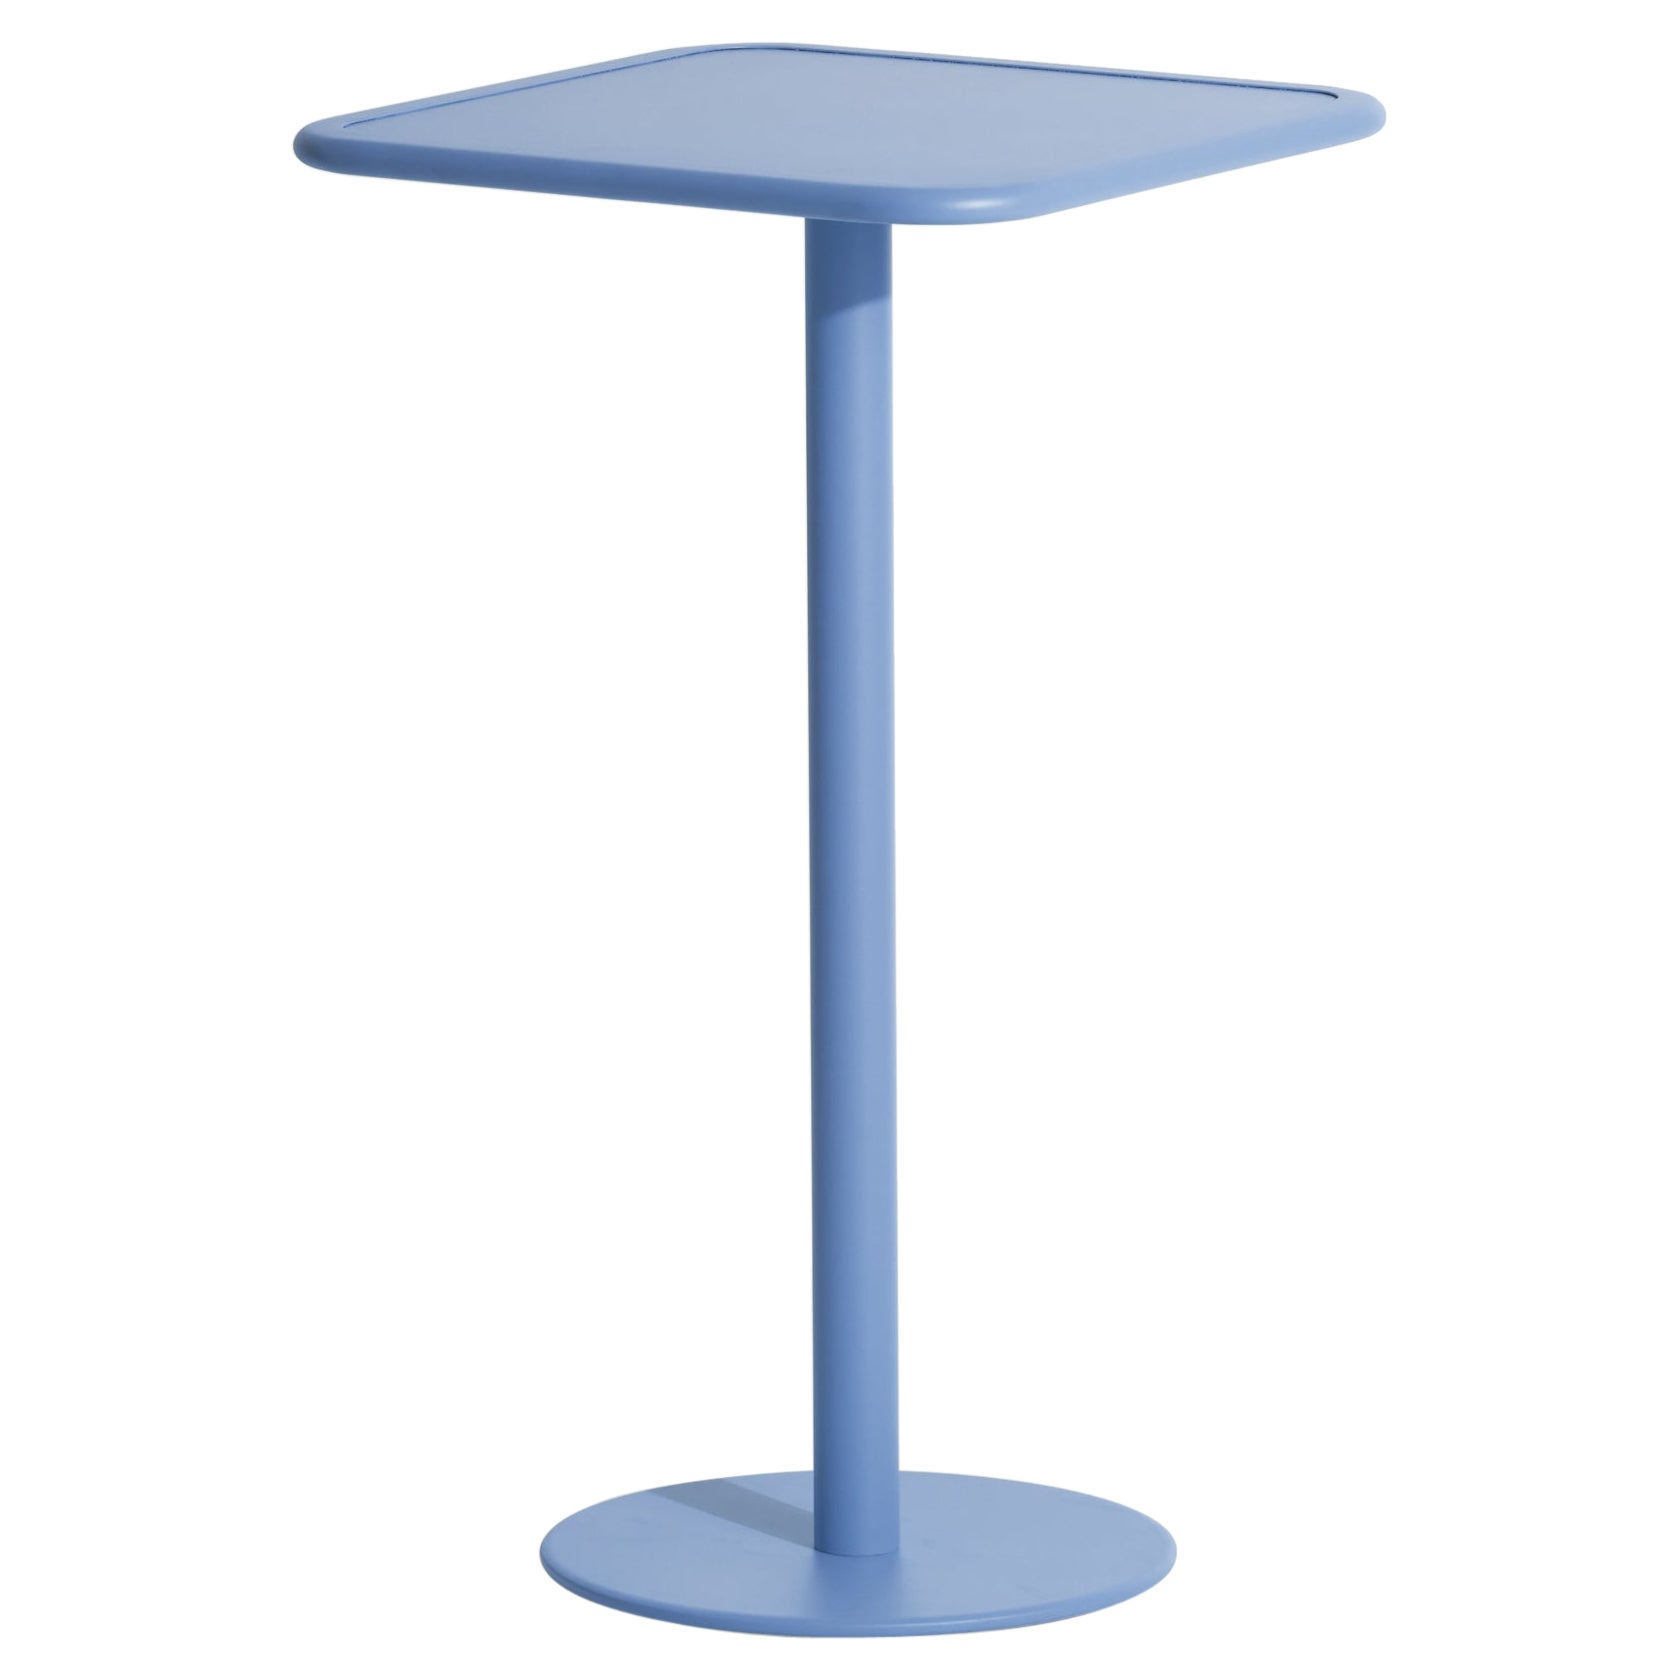 Petite Friture Week-End Square High Table in Azure Blue Aluminium, 2017 For Sale